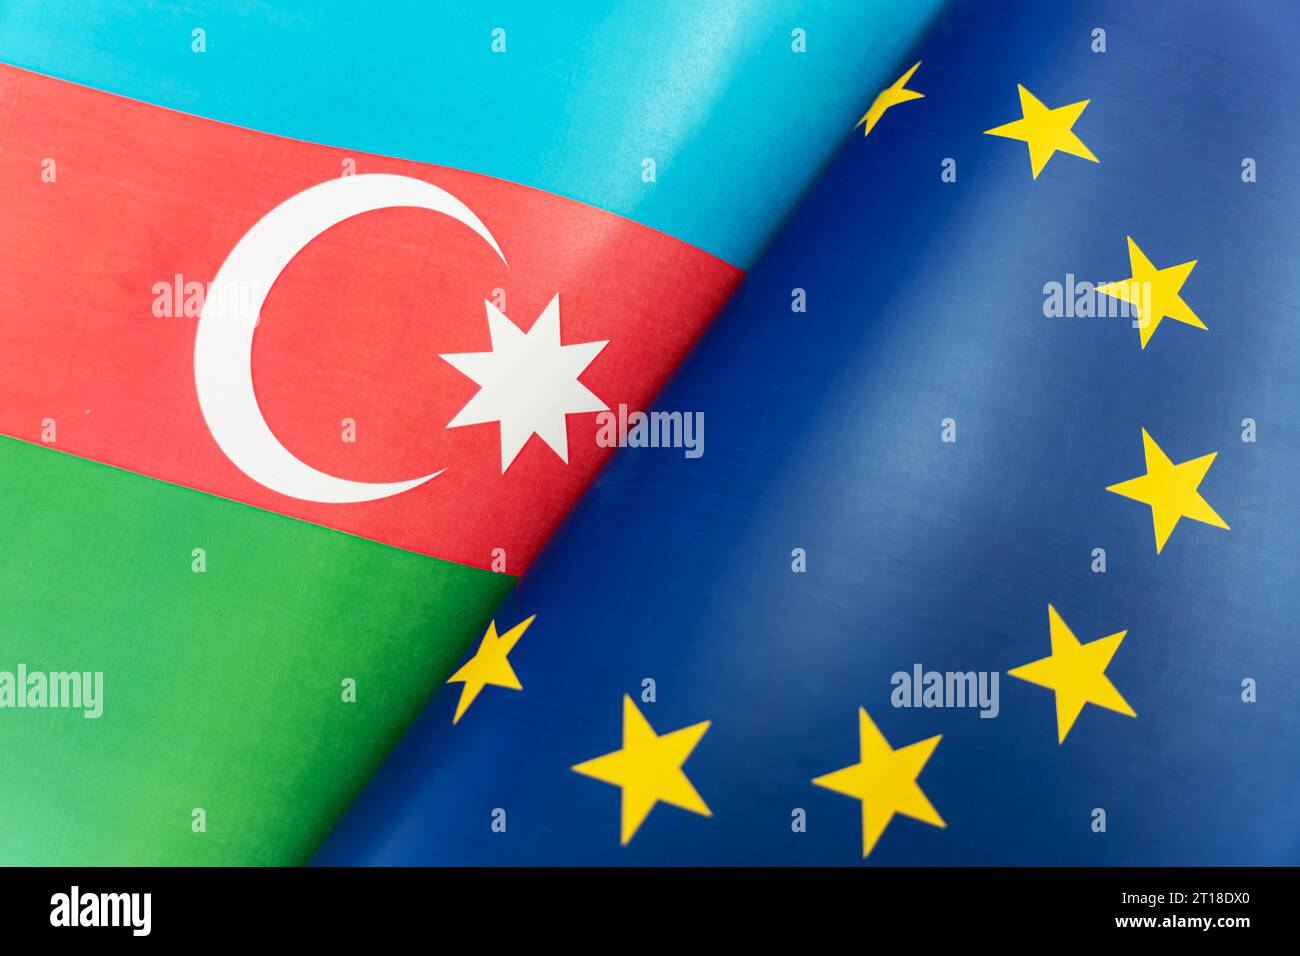 Flags of the European Union and azerbaijan. The concept of international relations between countries. The concept of an alliance or a confrontation be Stock Photo